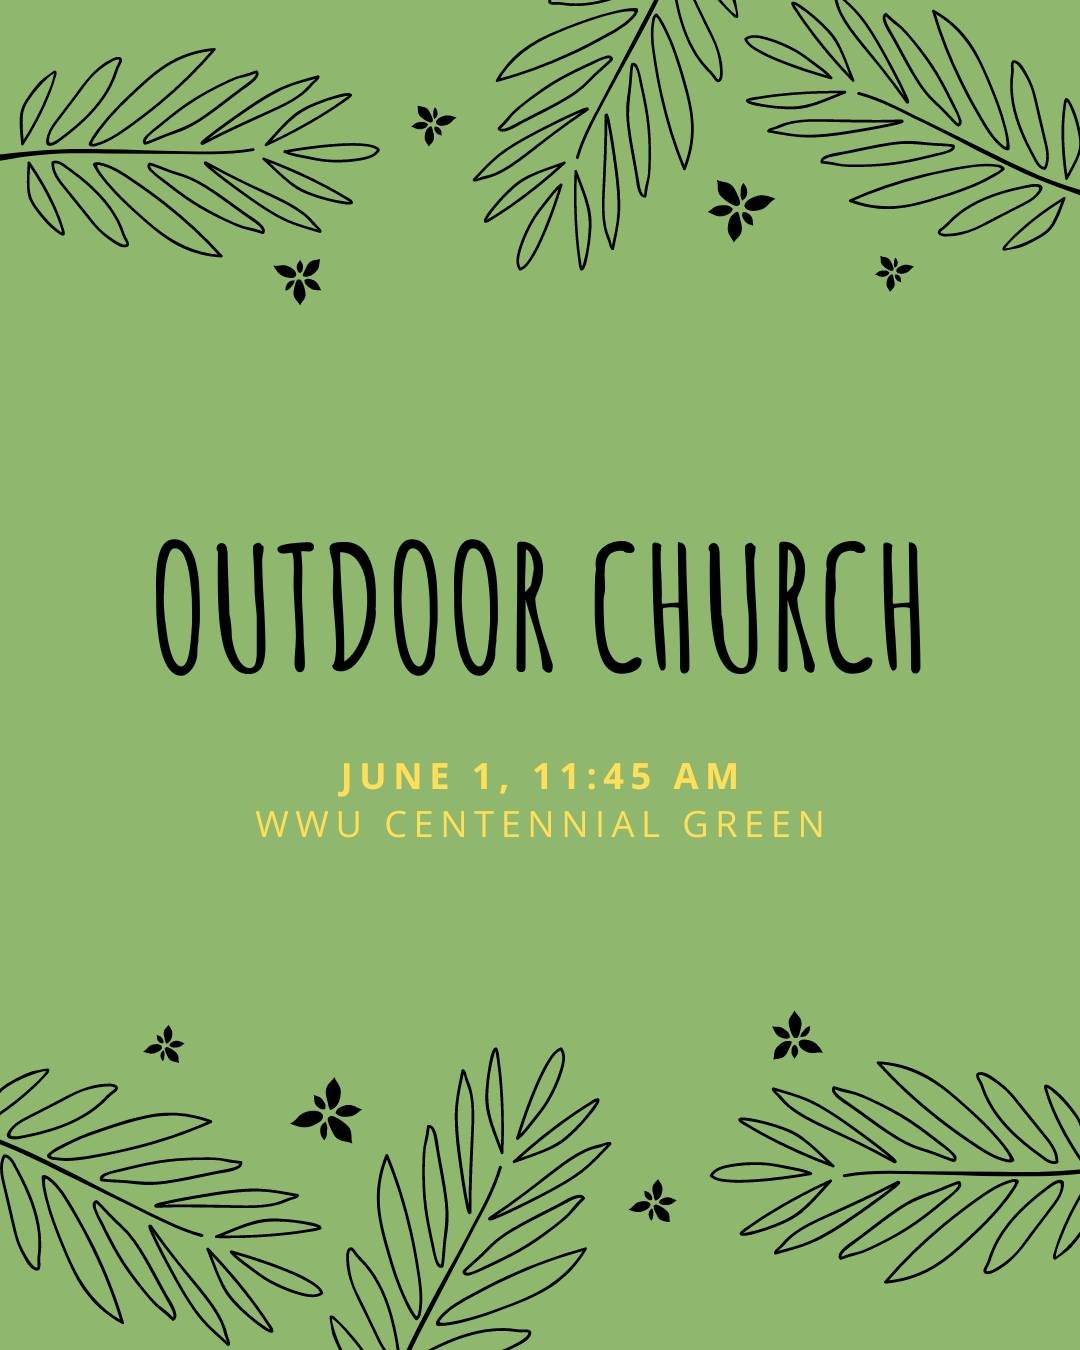 Plan to join us on June 1st at 11:45 am at Centennial Green!